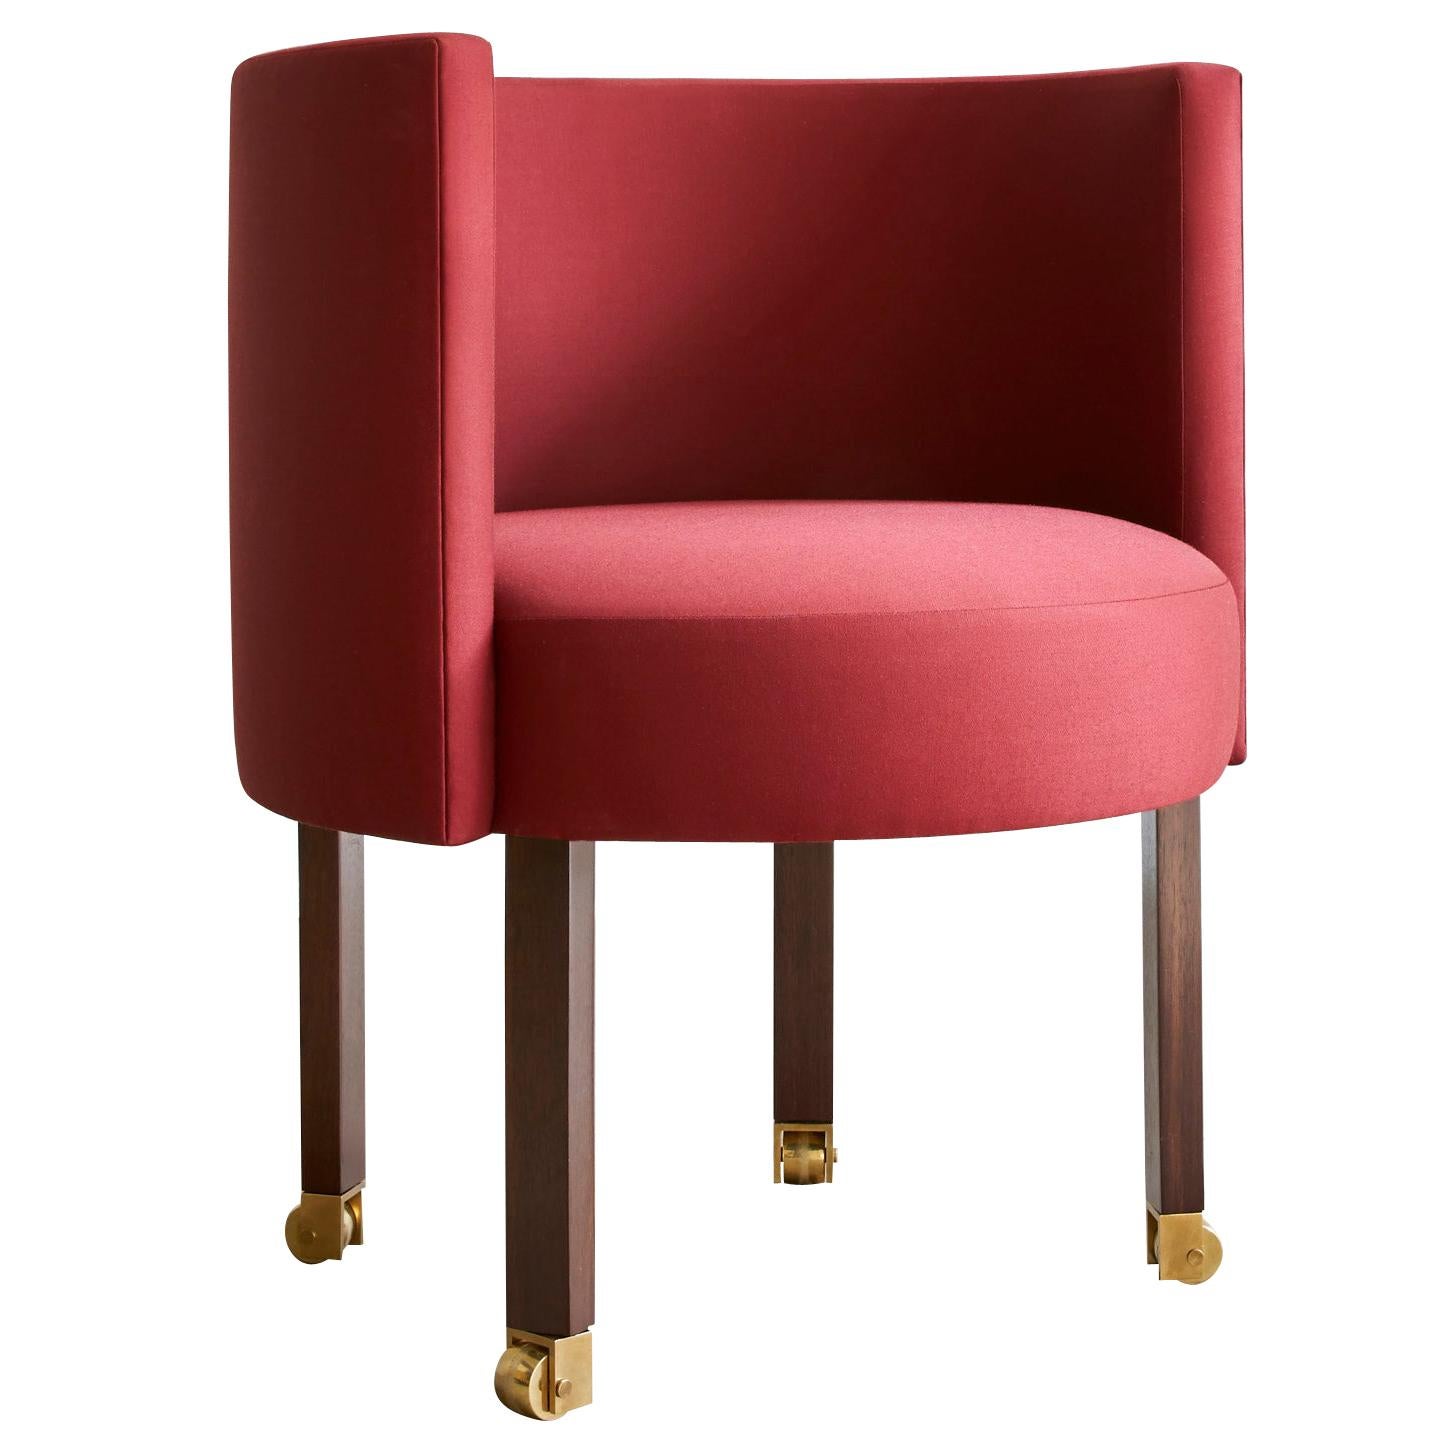 Regency Dining Chair by Billy Cotton in Burgundy Fabric, Walnut, and Brass For Sale